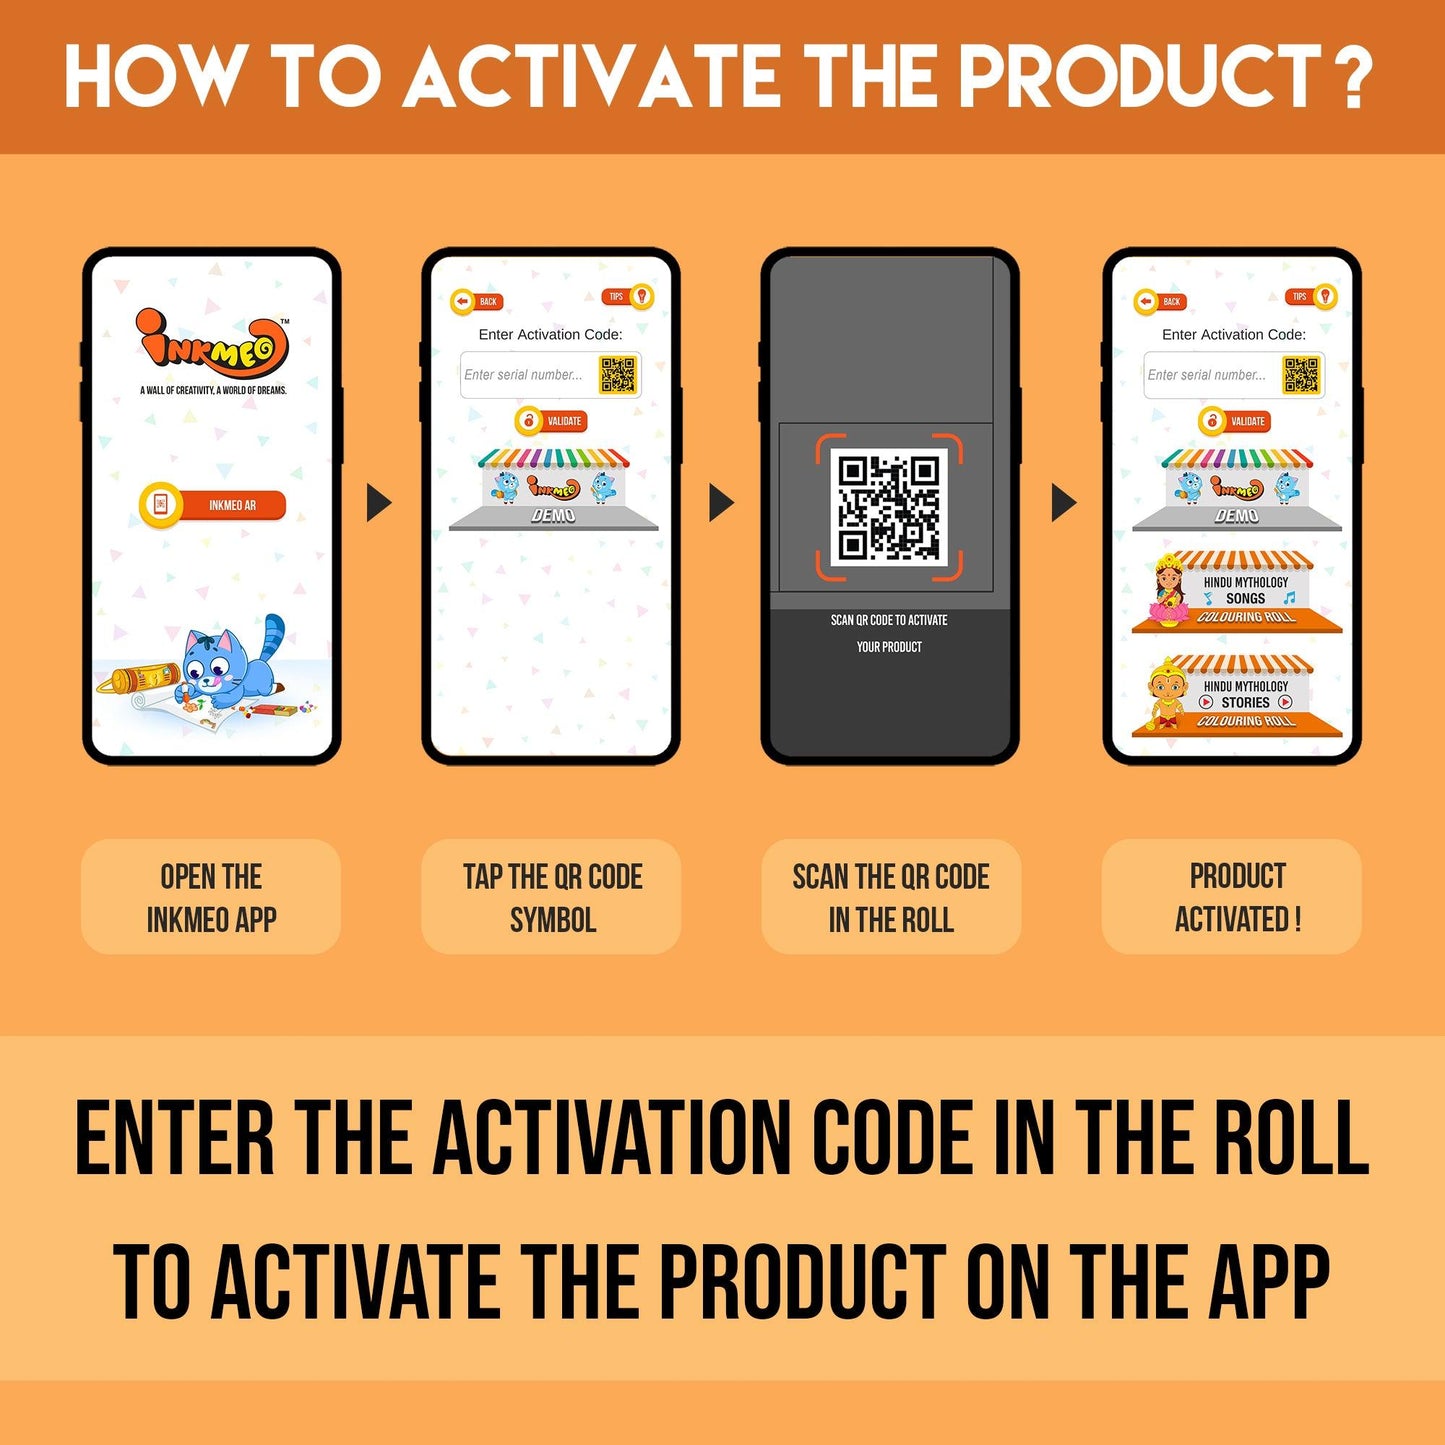 HinduThe image demonstrates how to activate the product: the first step is to open the Inkmeo app, the second step is to tap the QR code symbol, the third step is to scan the QR code on the packaging, and the fourth step is the product activated. Colouring Roll - Inkmeo